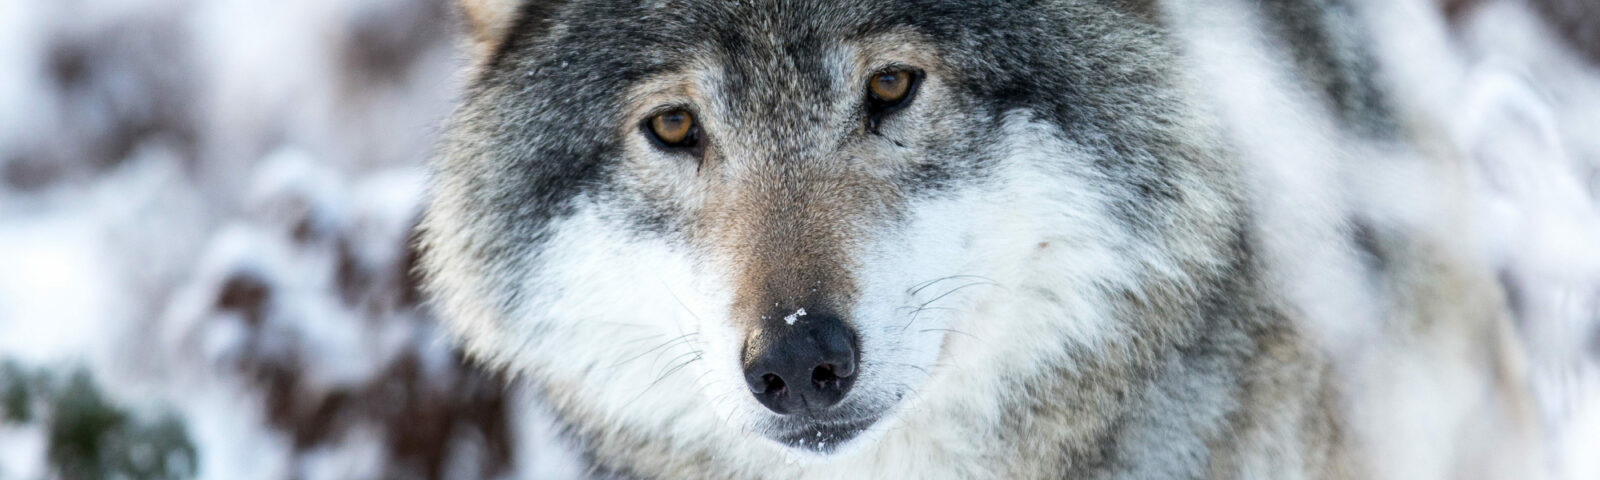 Worried about wolves? Attacks on humans are rare, but here are safety tips  for you, your dog